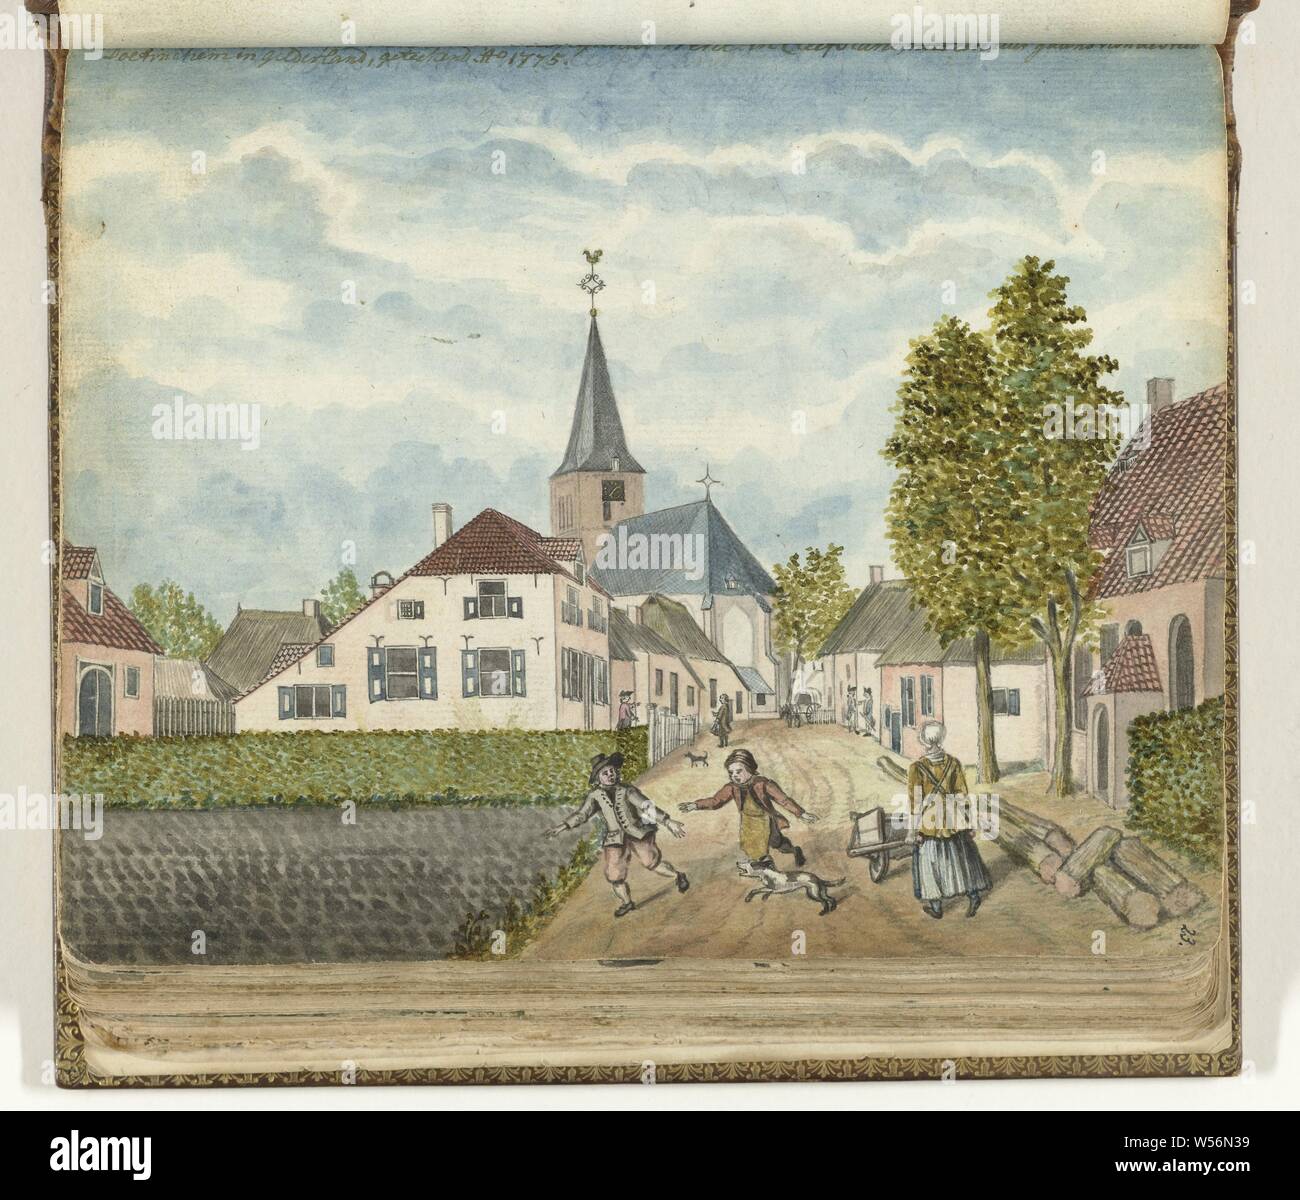 The village of Wehl in Cleefsland, Color Drawing. View of the village of Wehl 'an hour's walk' from Doetinchem. An unpaved road to the church with houses on either side. Children playing in the foreground and a woman with a wheelbarrow. Behind are two men and two soldiers. With inscription. Part from the sketchbook by Jan Brandes, dl. 1 (1808), p. 23, Wehl, Jan Brandes, 1775, paper, pencil, brush, h 155 mm × w 195 mm Stock Photo